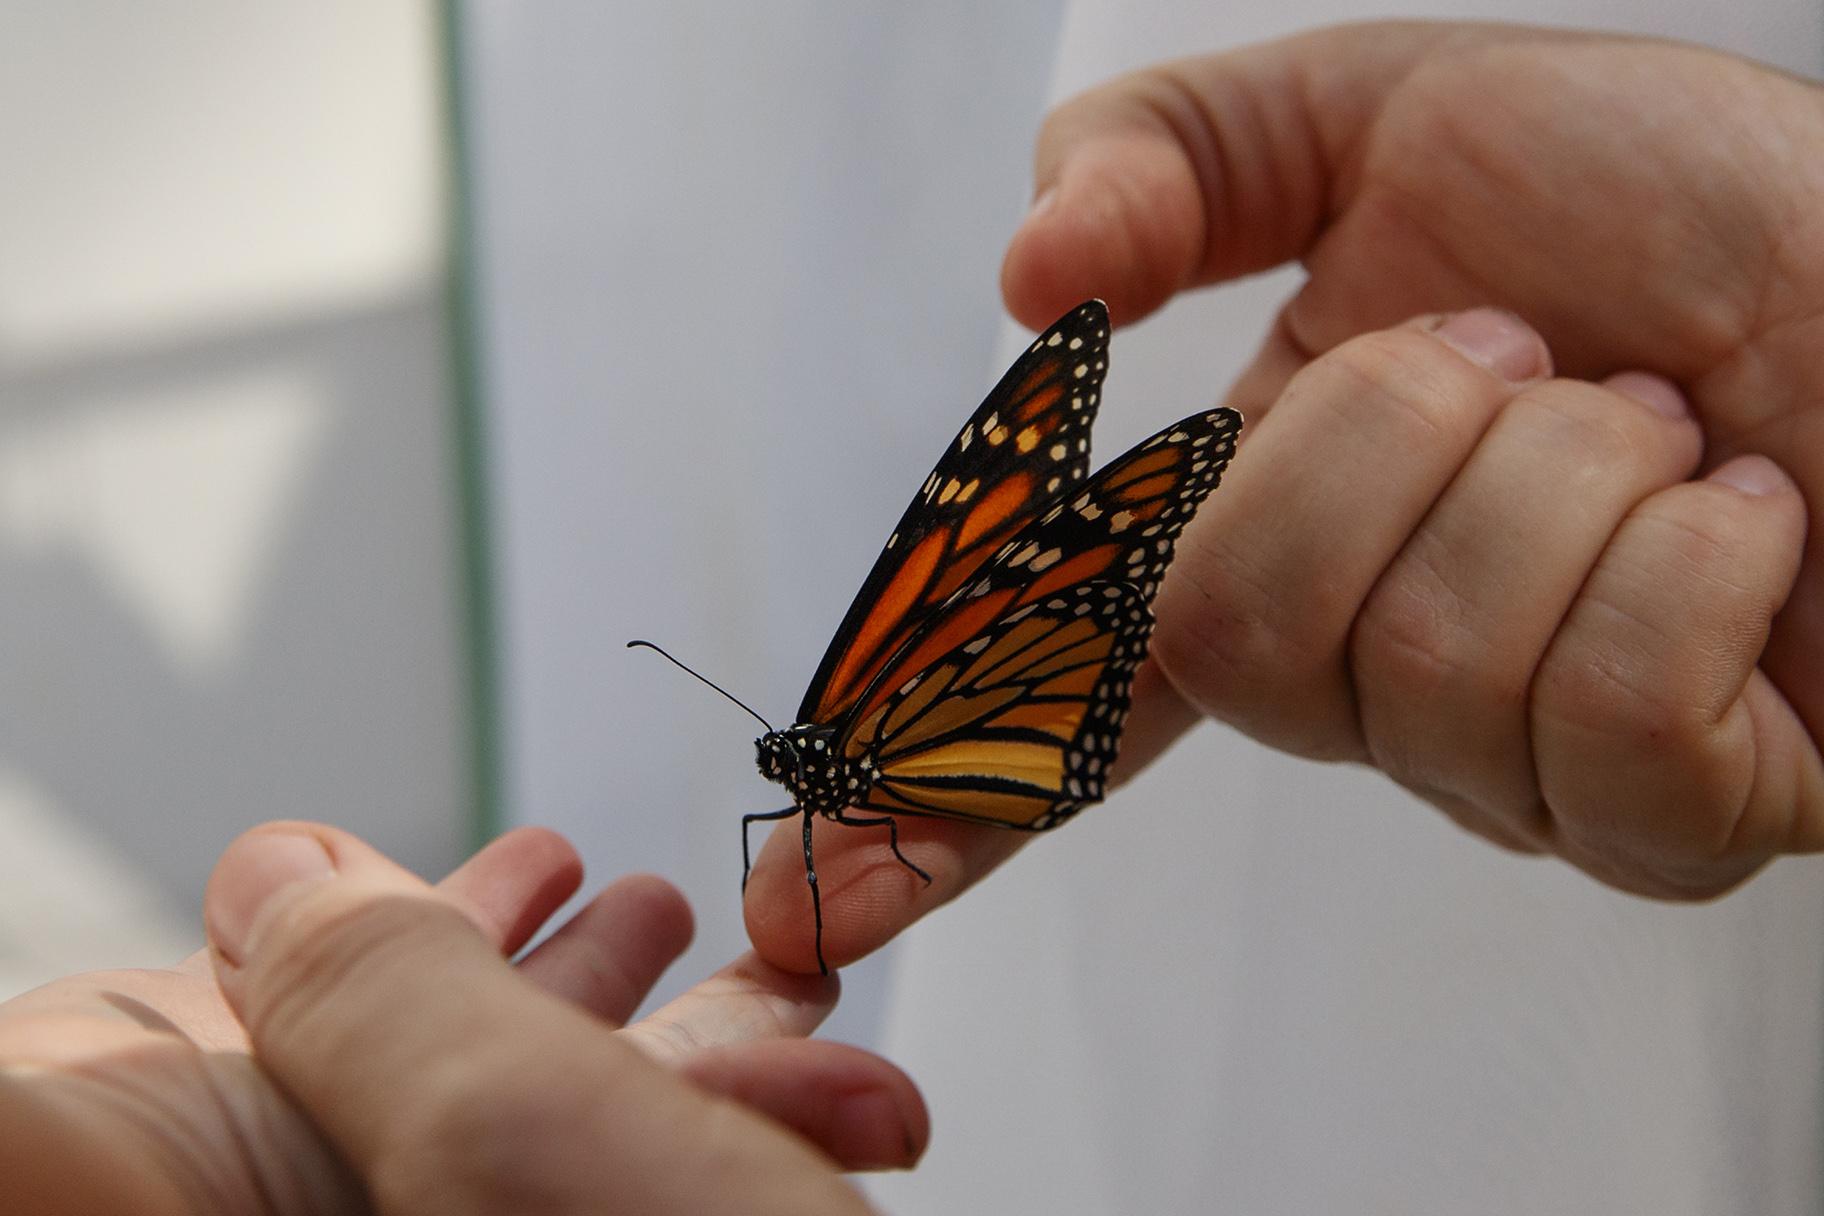 Laura Moore directs a fresh new monarch butterfly from her finger to her 3-year-old neighbor Thomas Powell in her Greenbelt, Maryland, yard on Friday, May 31, 2019. Despite efforts by Moore and countless other volunteers and organizations across the United States to grow milkweed, nurture caterpillars, and tag and count monarchs on the insects’ annual migrations up and down America, the butterfly is in trouble. (AP Photo / Carolyn Kaster)